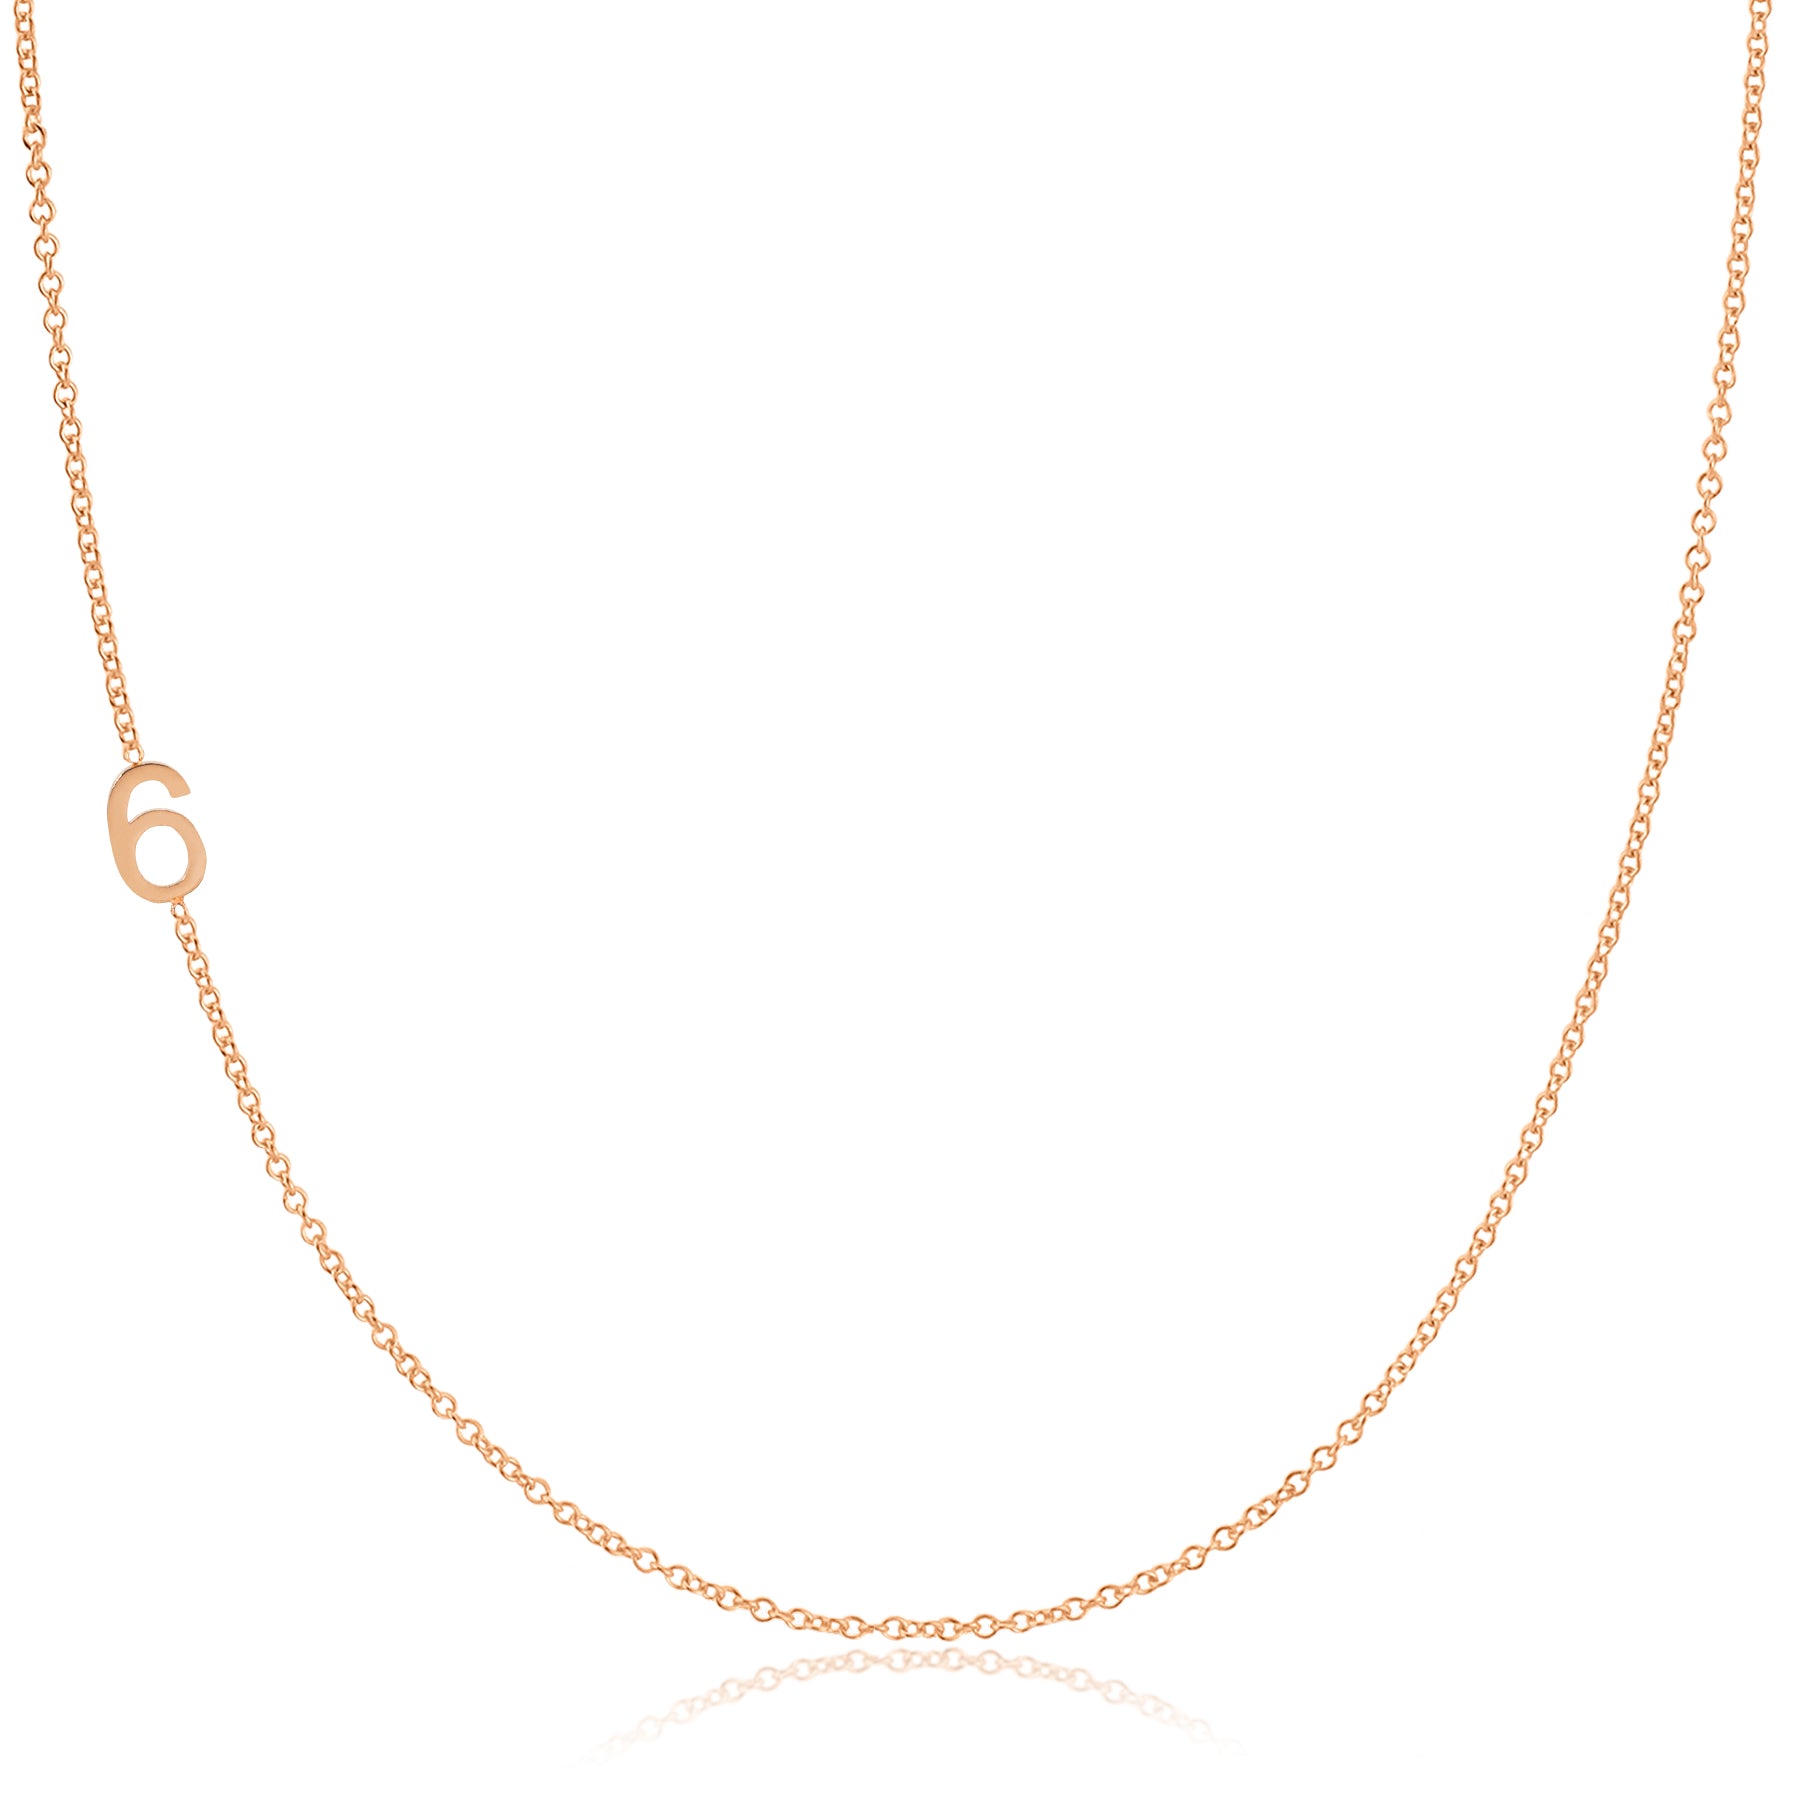 14K GOLD ASYMMETRICAL NUMBER NECKLACE - 6